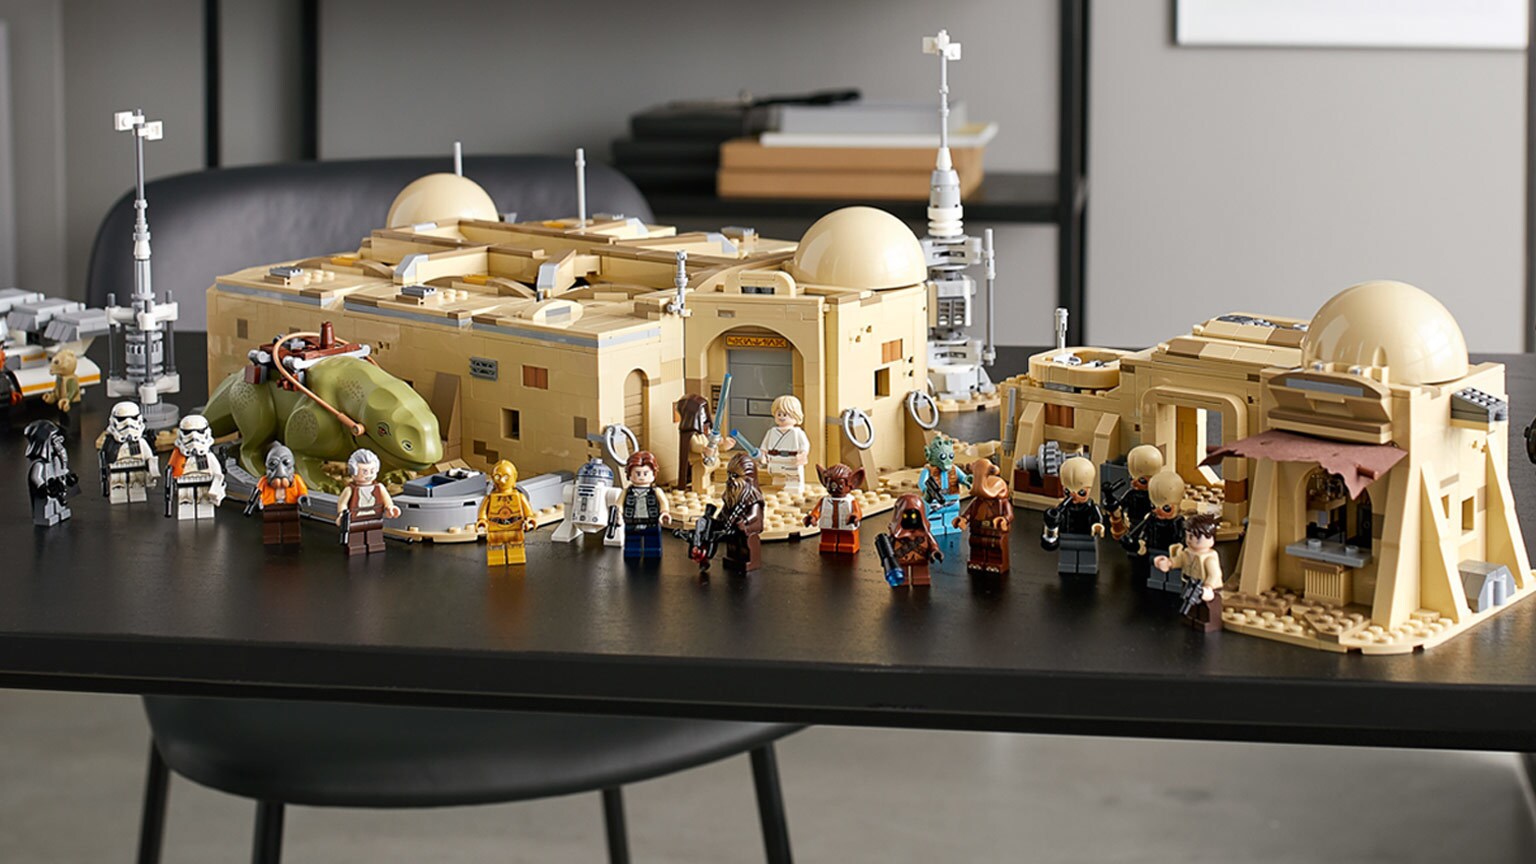 The New LEGO Star Wars Mos Eisley Cantina is a Wretched Hive of Scum and Villainy - and It’s Glorious